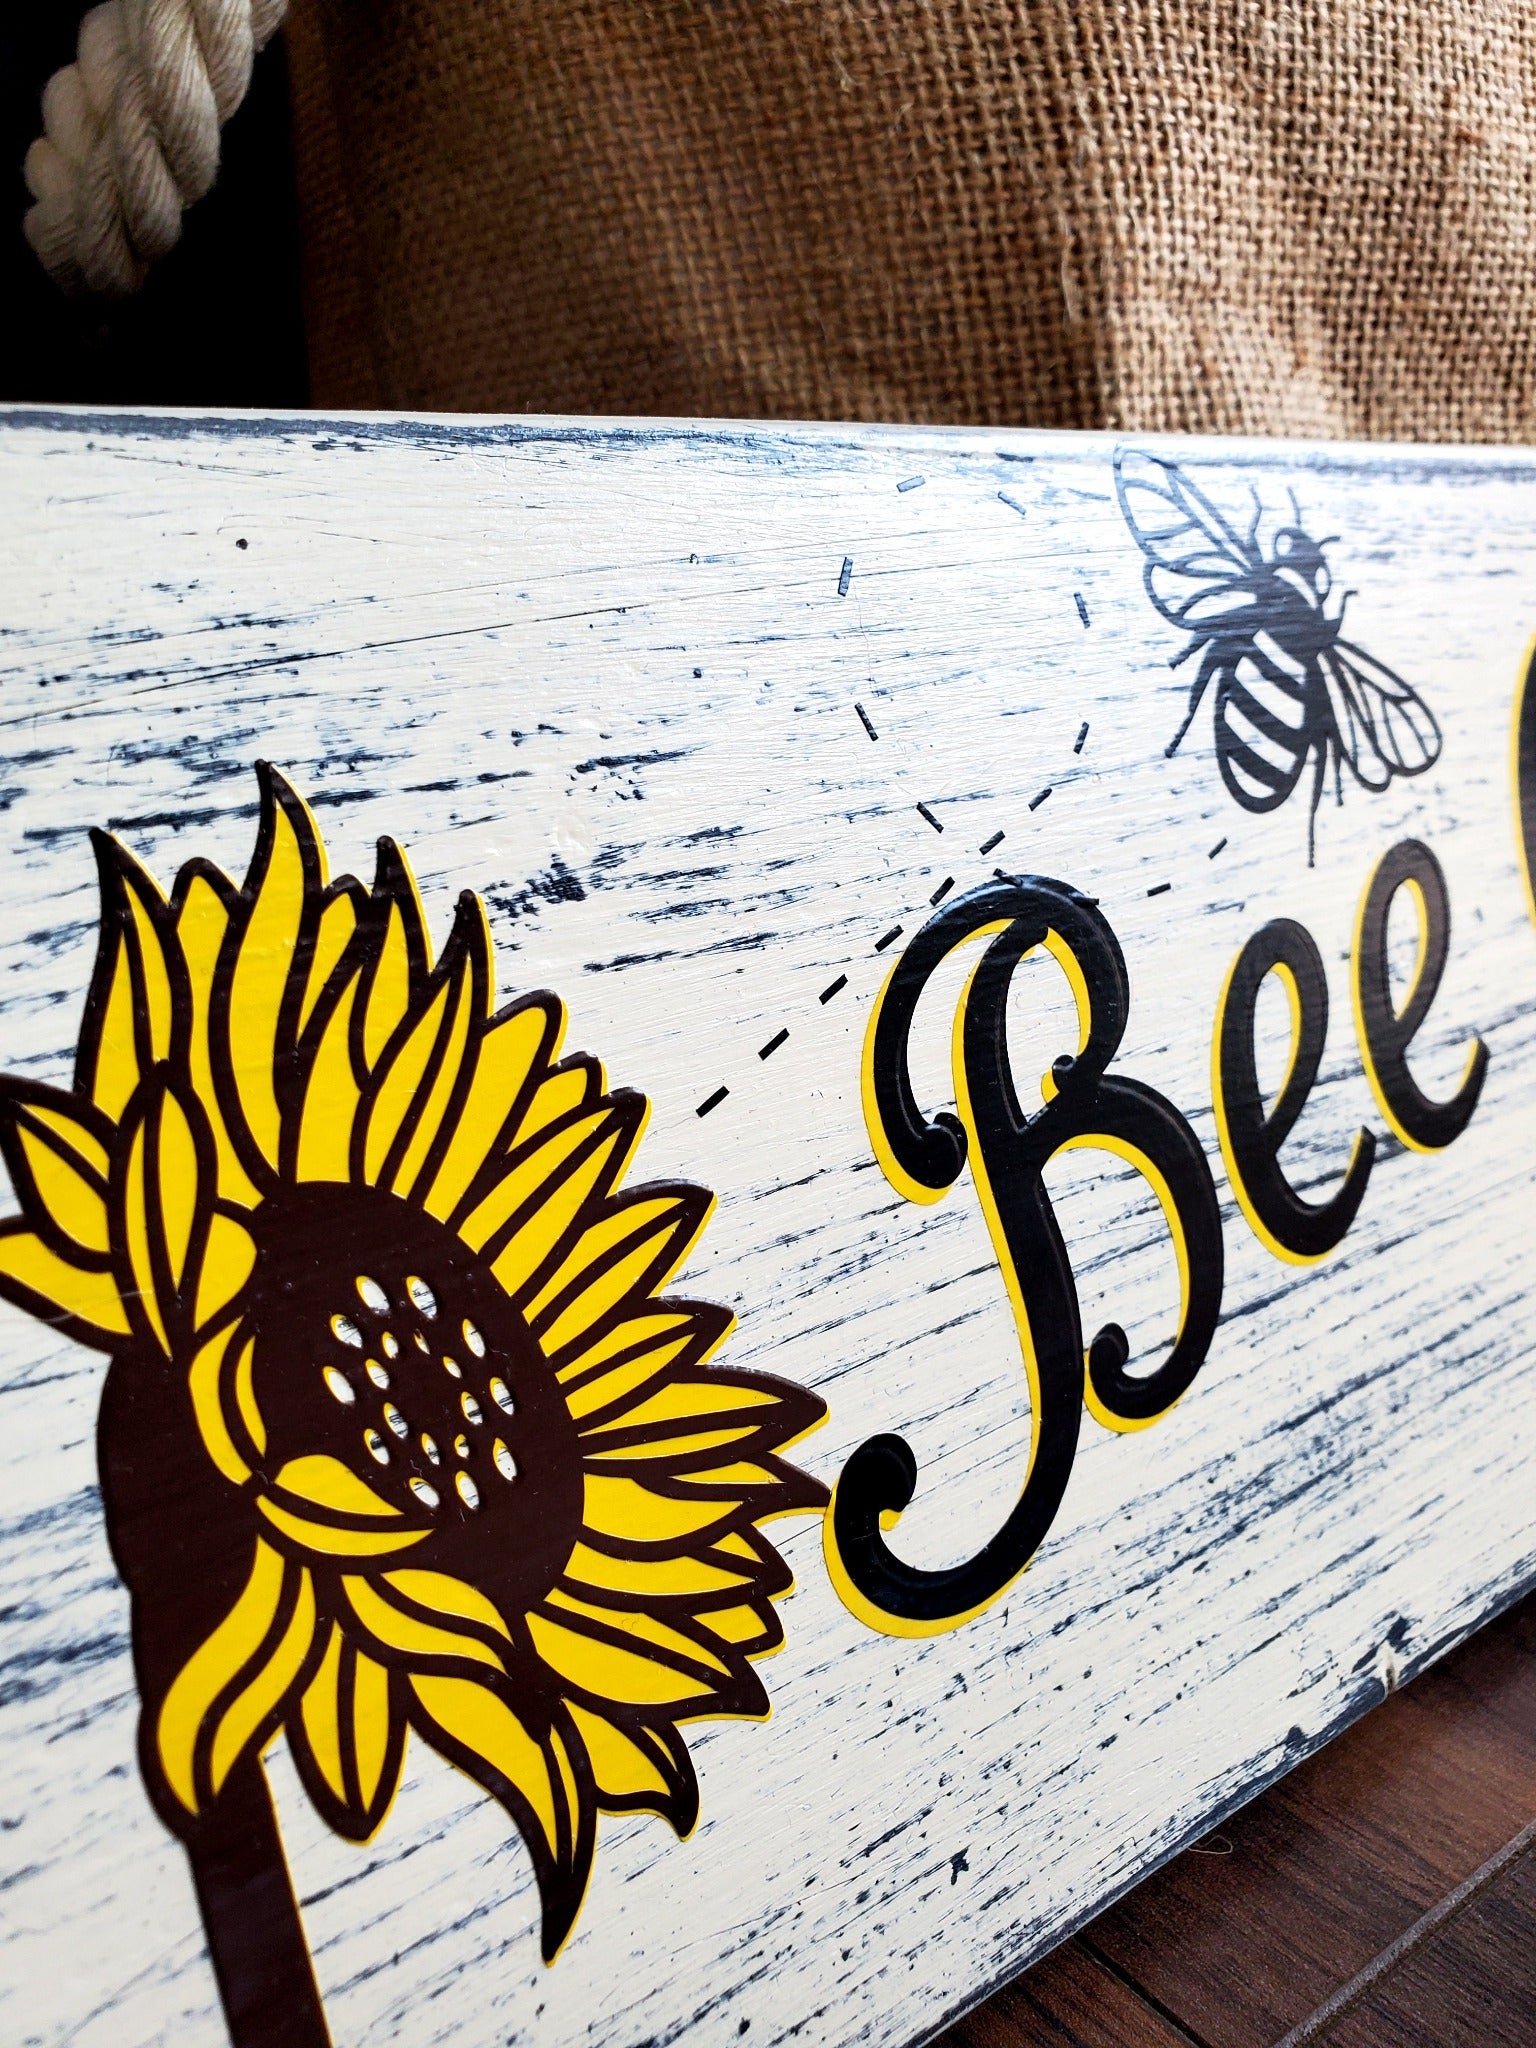 Bee Our Guest Sign.